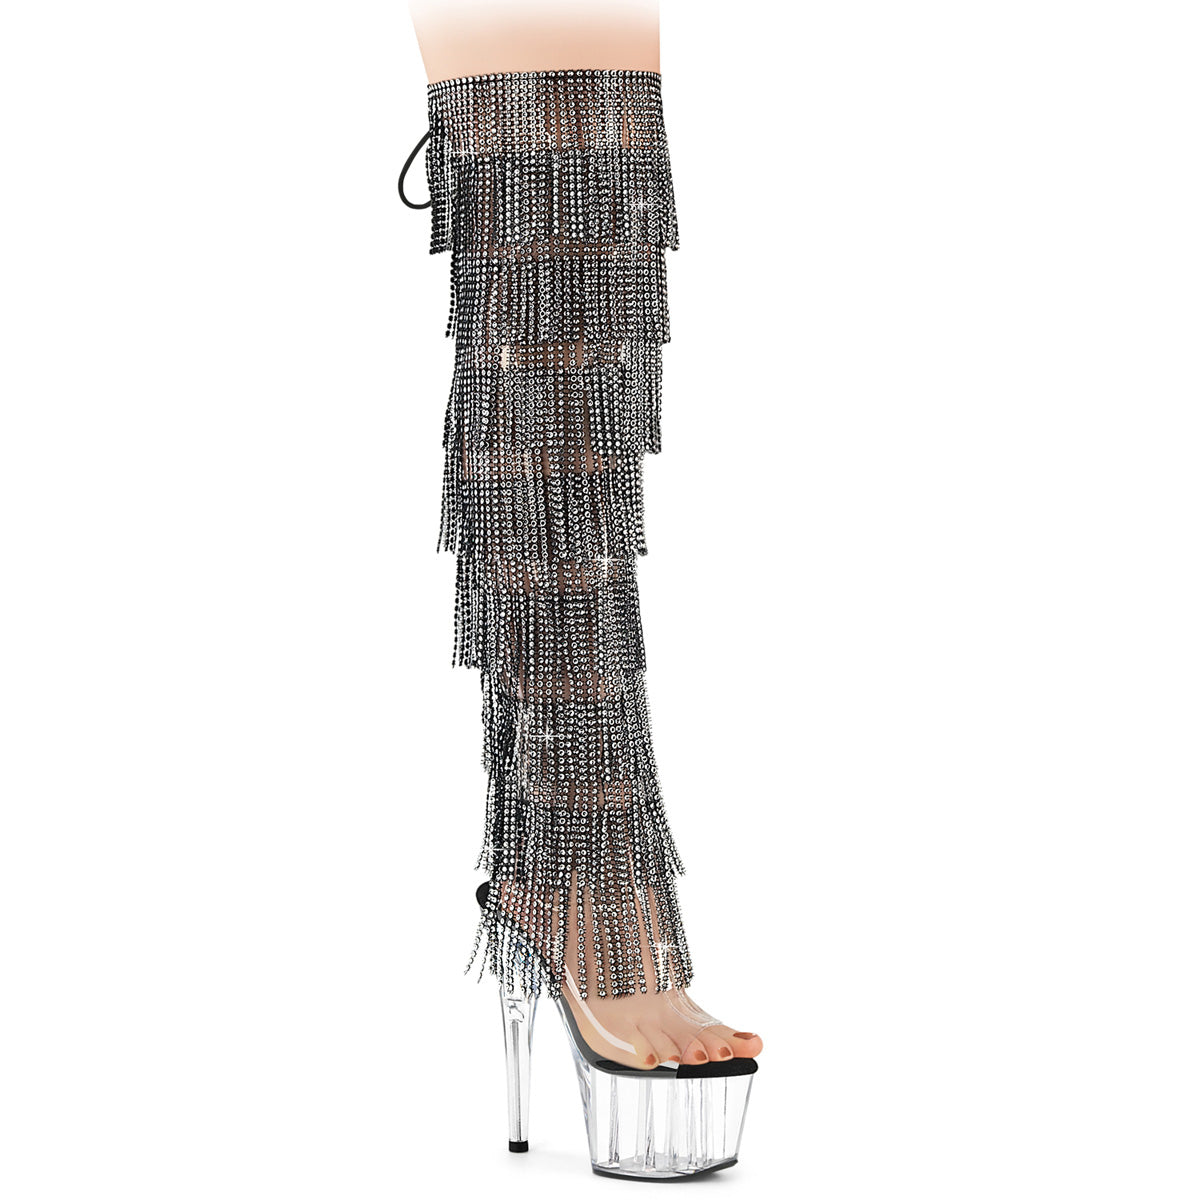 ADORE-3019C-RSF Thigh High Boots